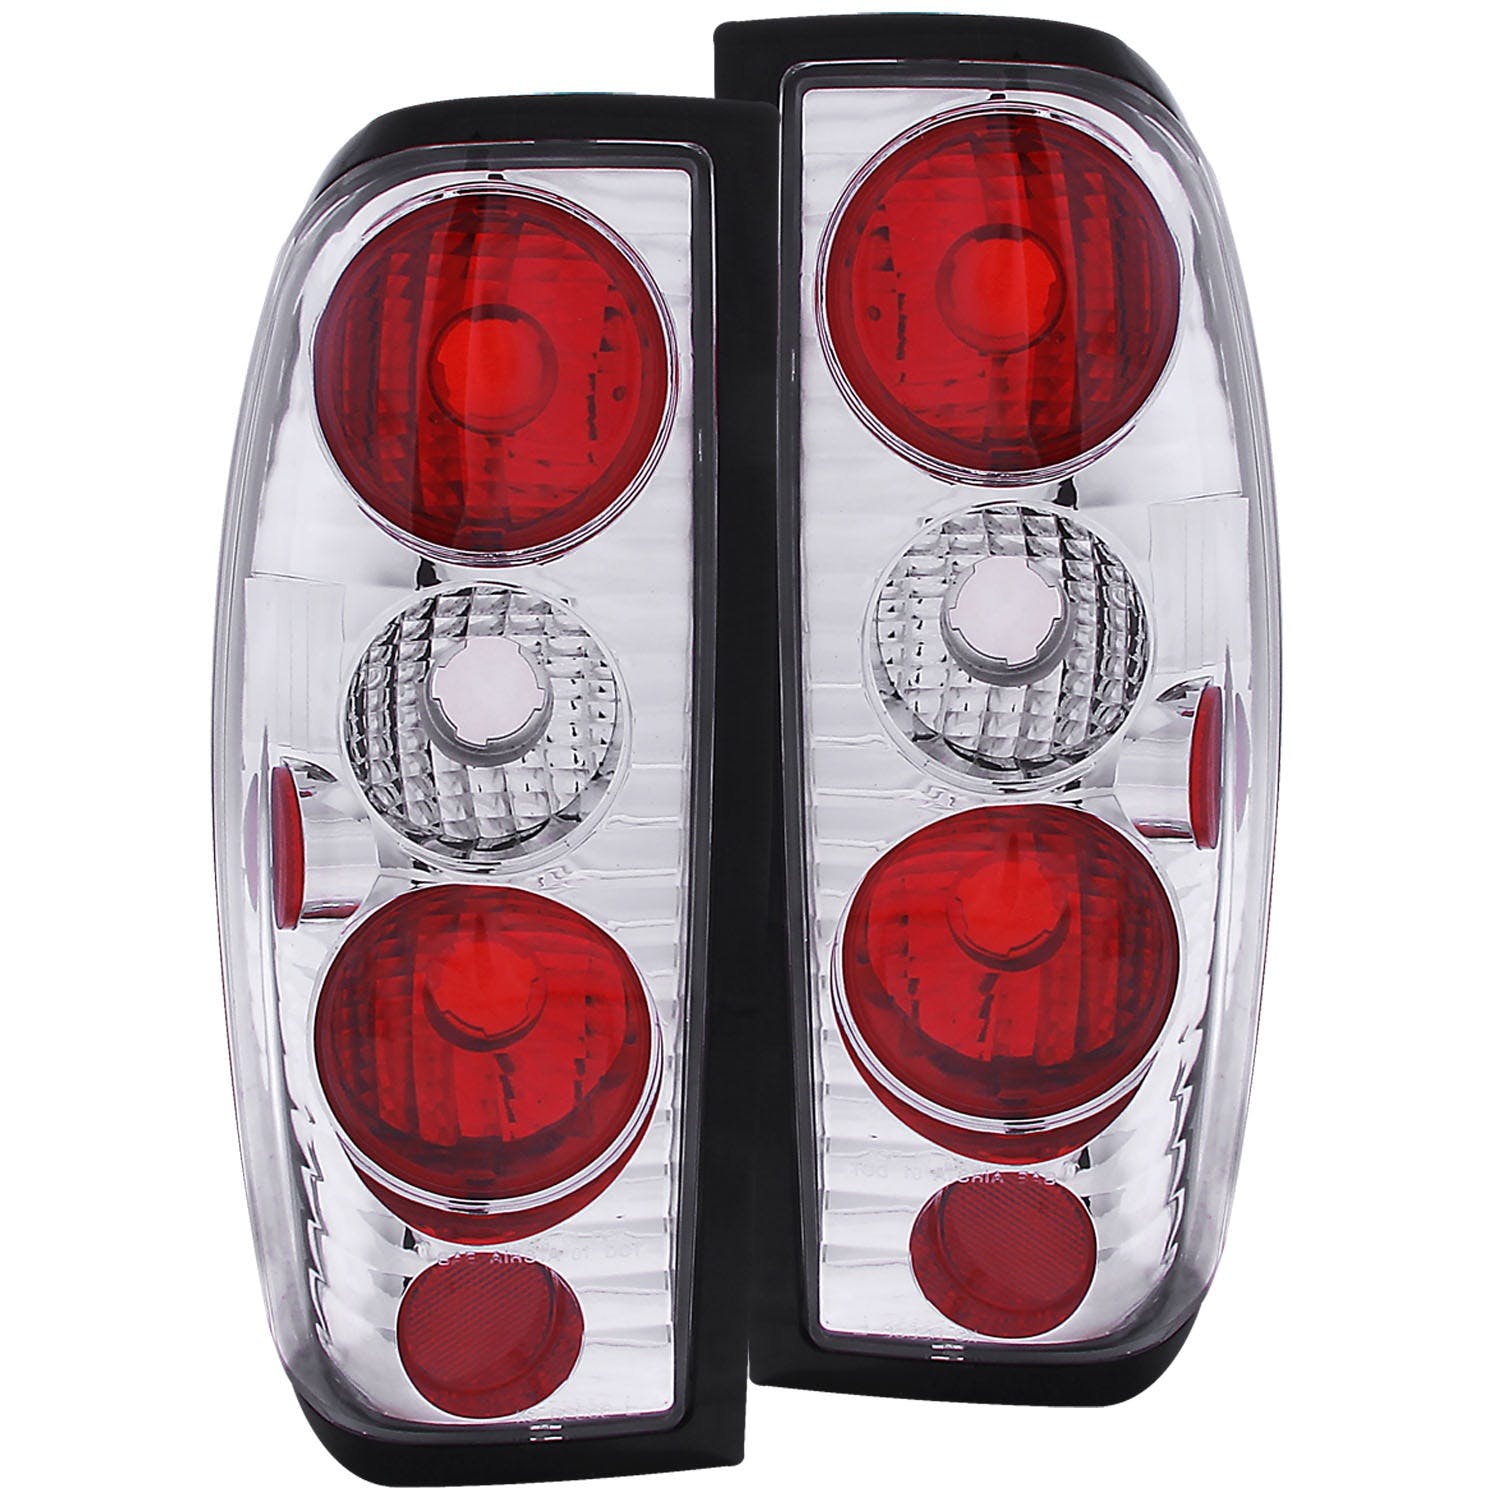 AnzoUSA 211114 Taillights Chrome